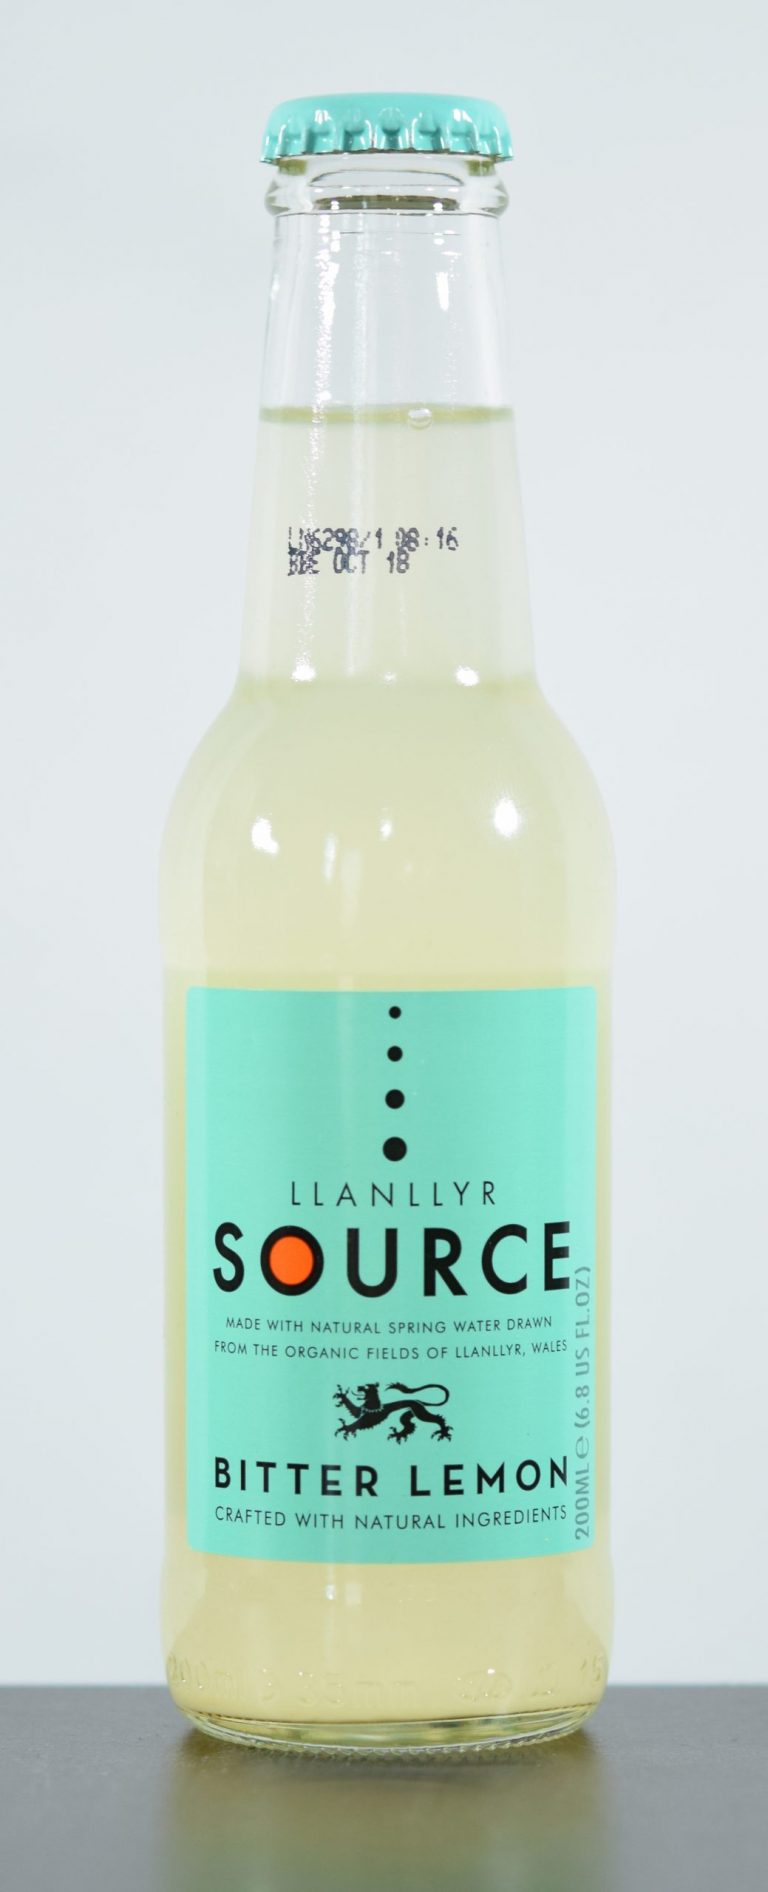 Llanllyr Source Bitter Lemon | Tonic Water Review and Tasting Notes